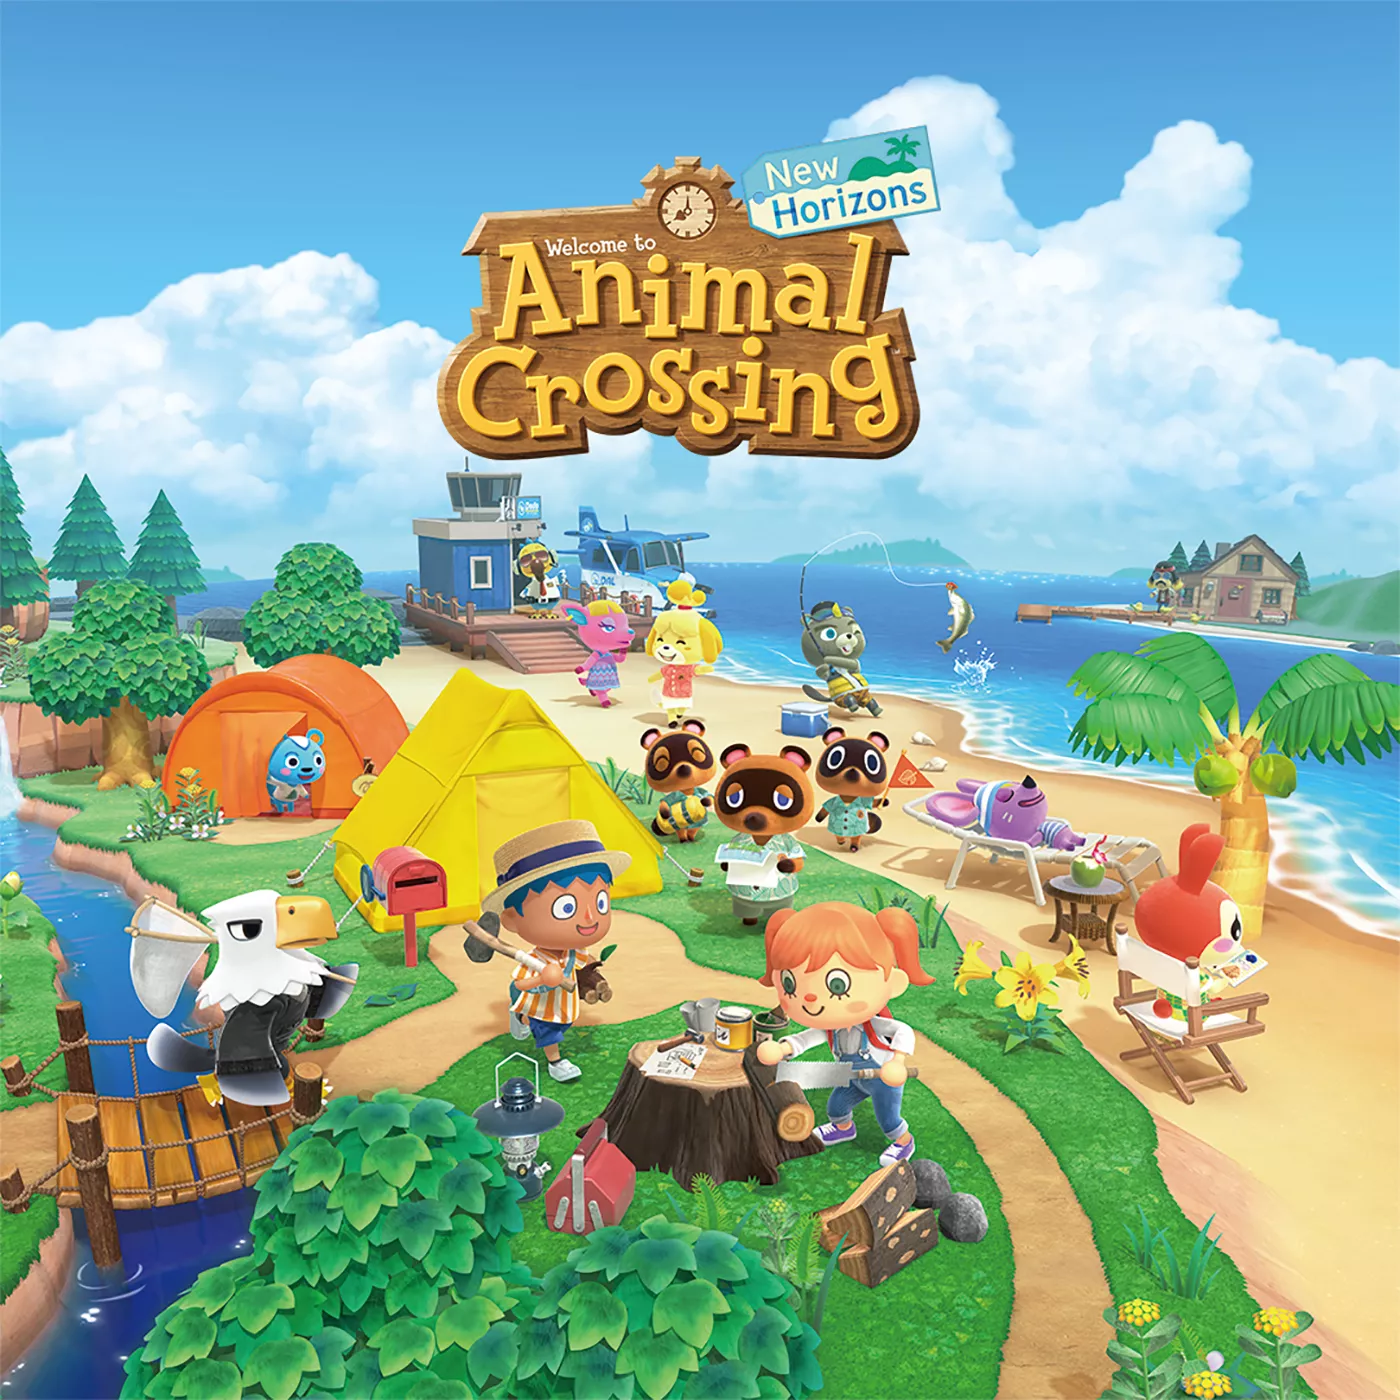 Animal Crossing: New Horizons' is the island escape we all need today